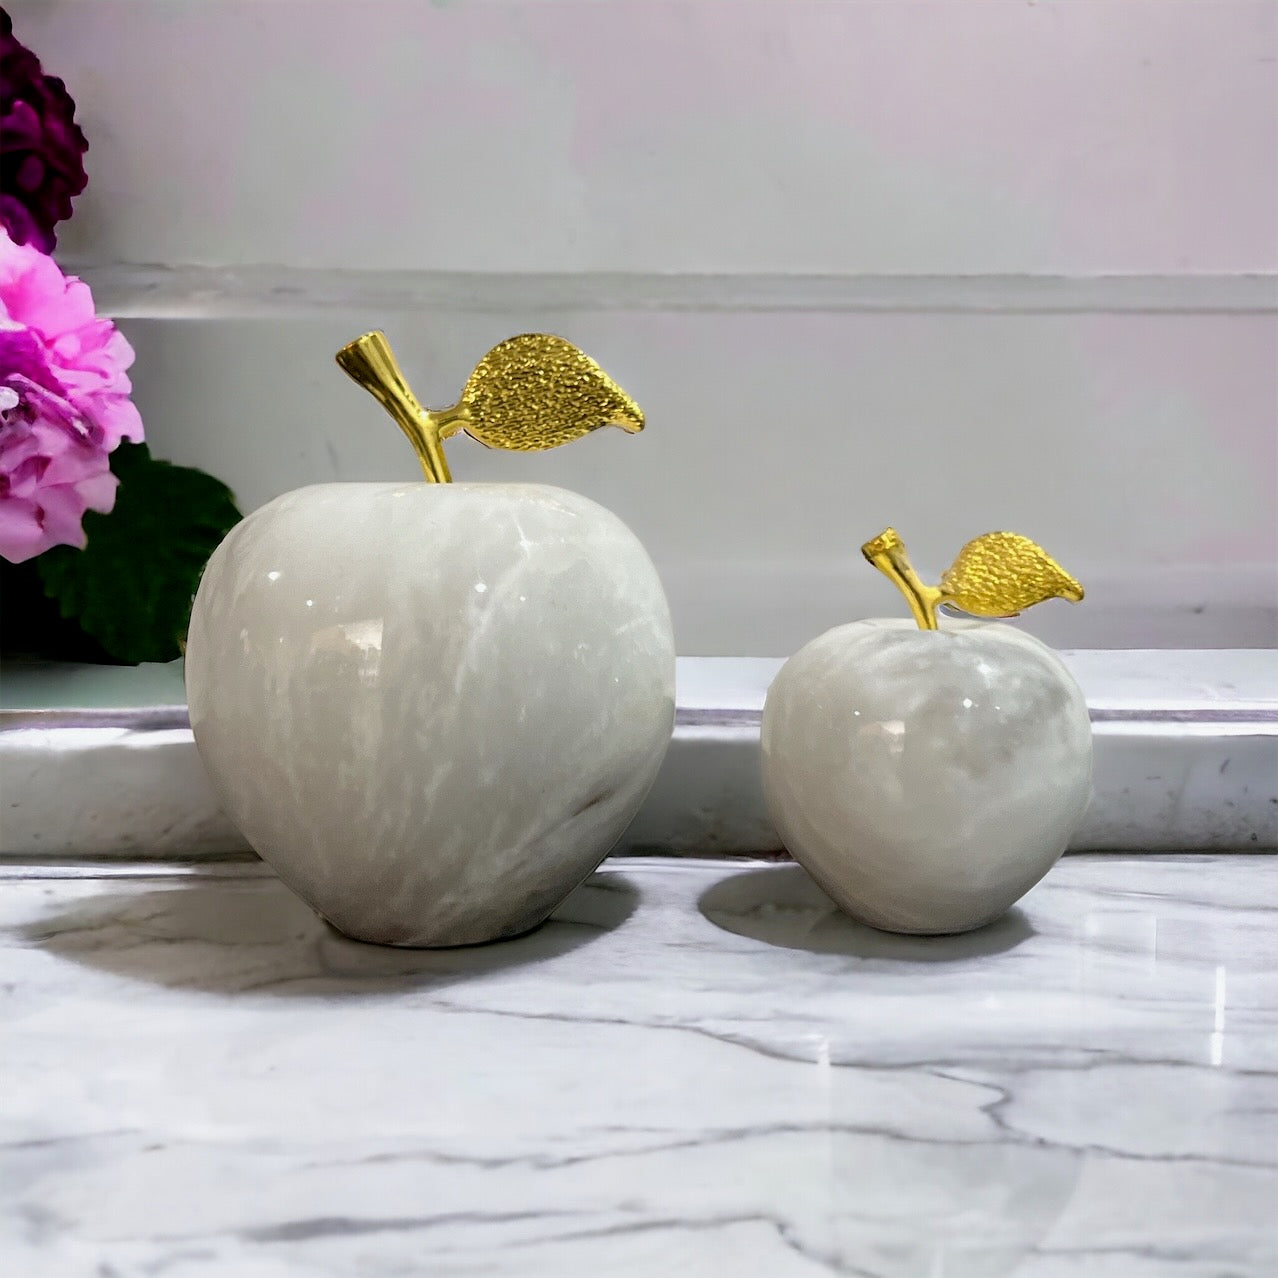 White Marble Apple Decorative Paperweight (7.5cm)